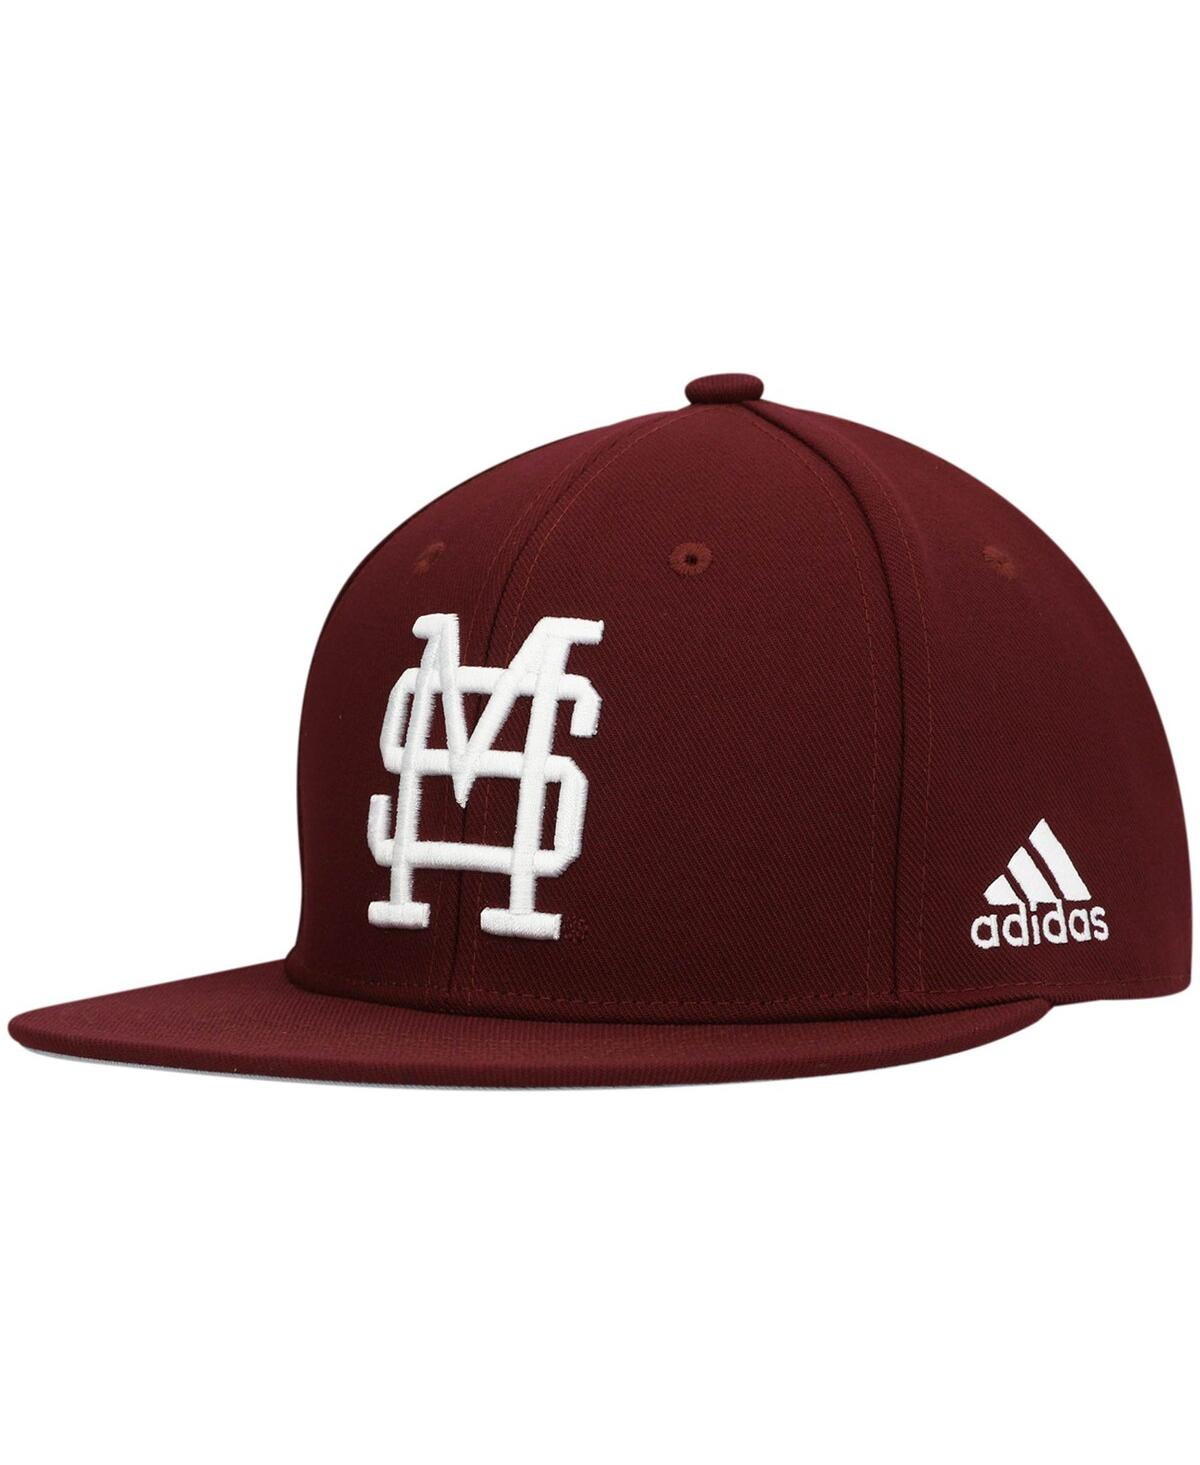 Shop Adidas Originals Men's Adidas Maroon Mississippi State Bulldogs Team On-field Baseball Fitted Hat